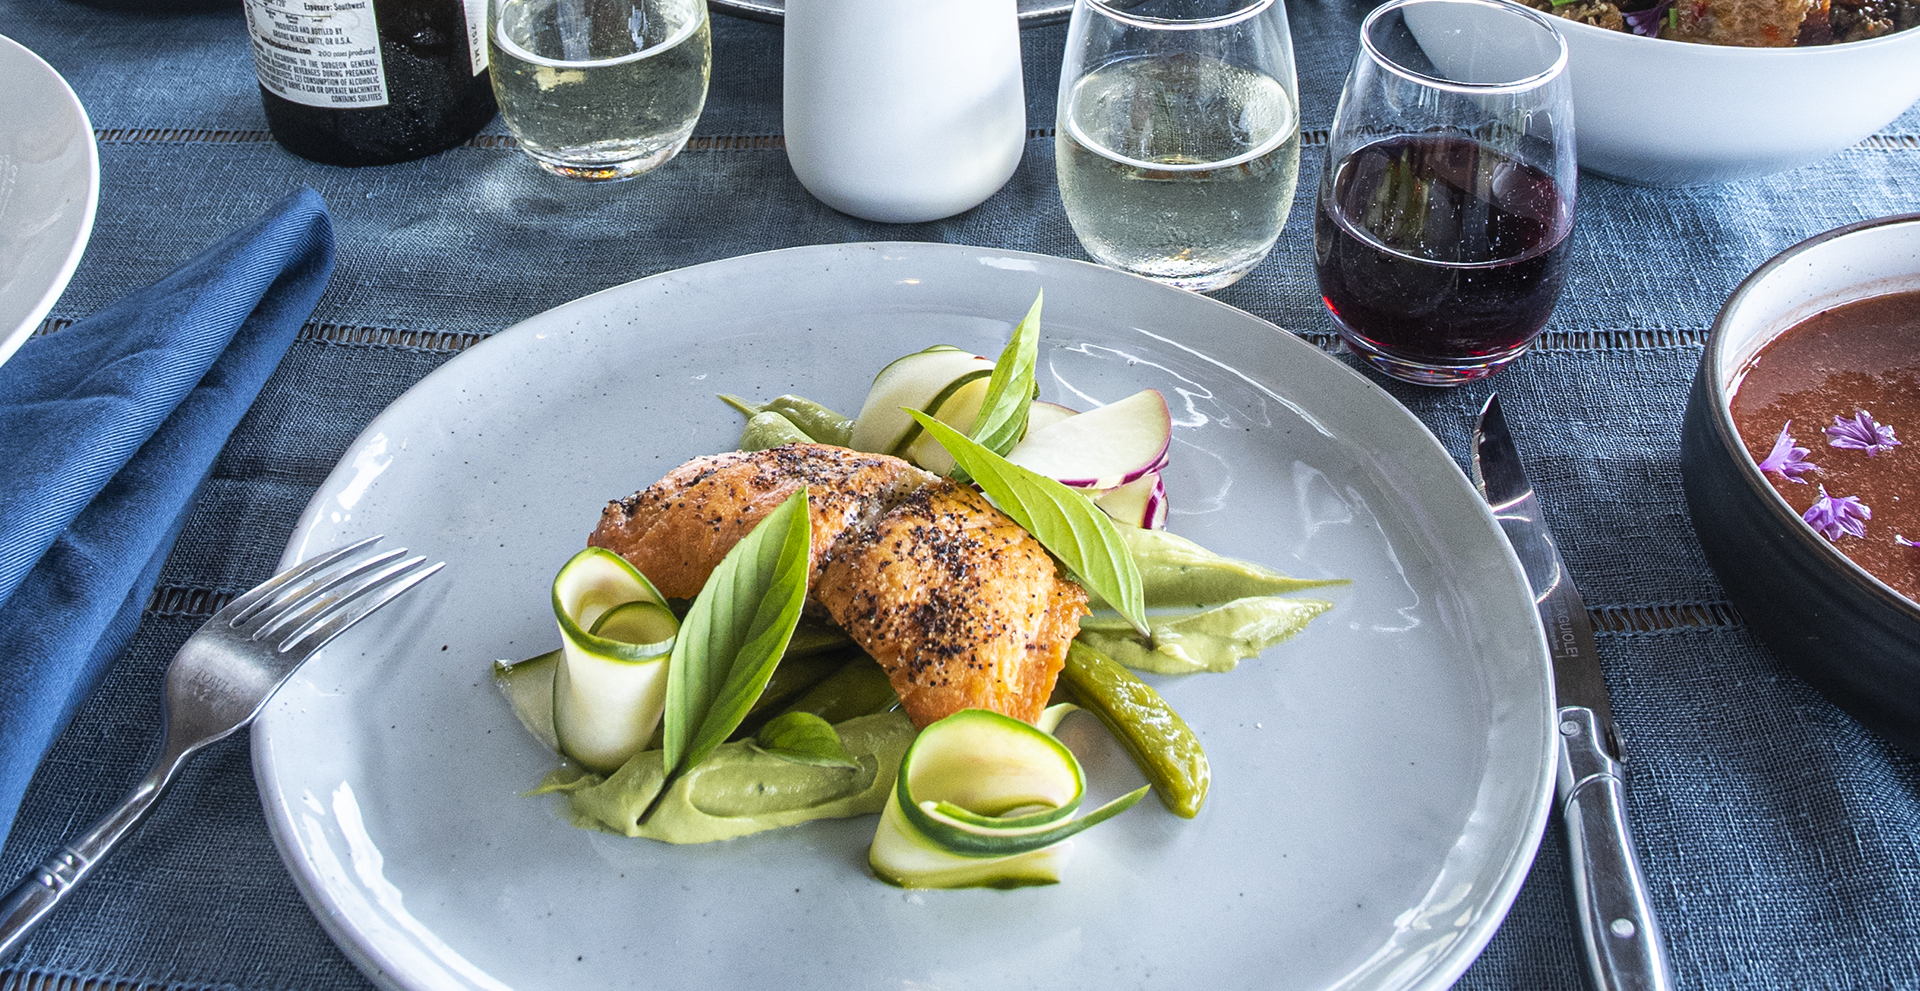 Pan-seared king salmon with an avocado mousse, snap peas, and pickled cucumber ribbons